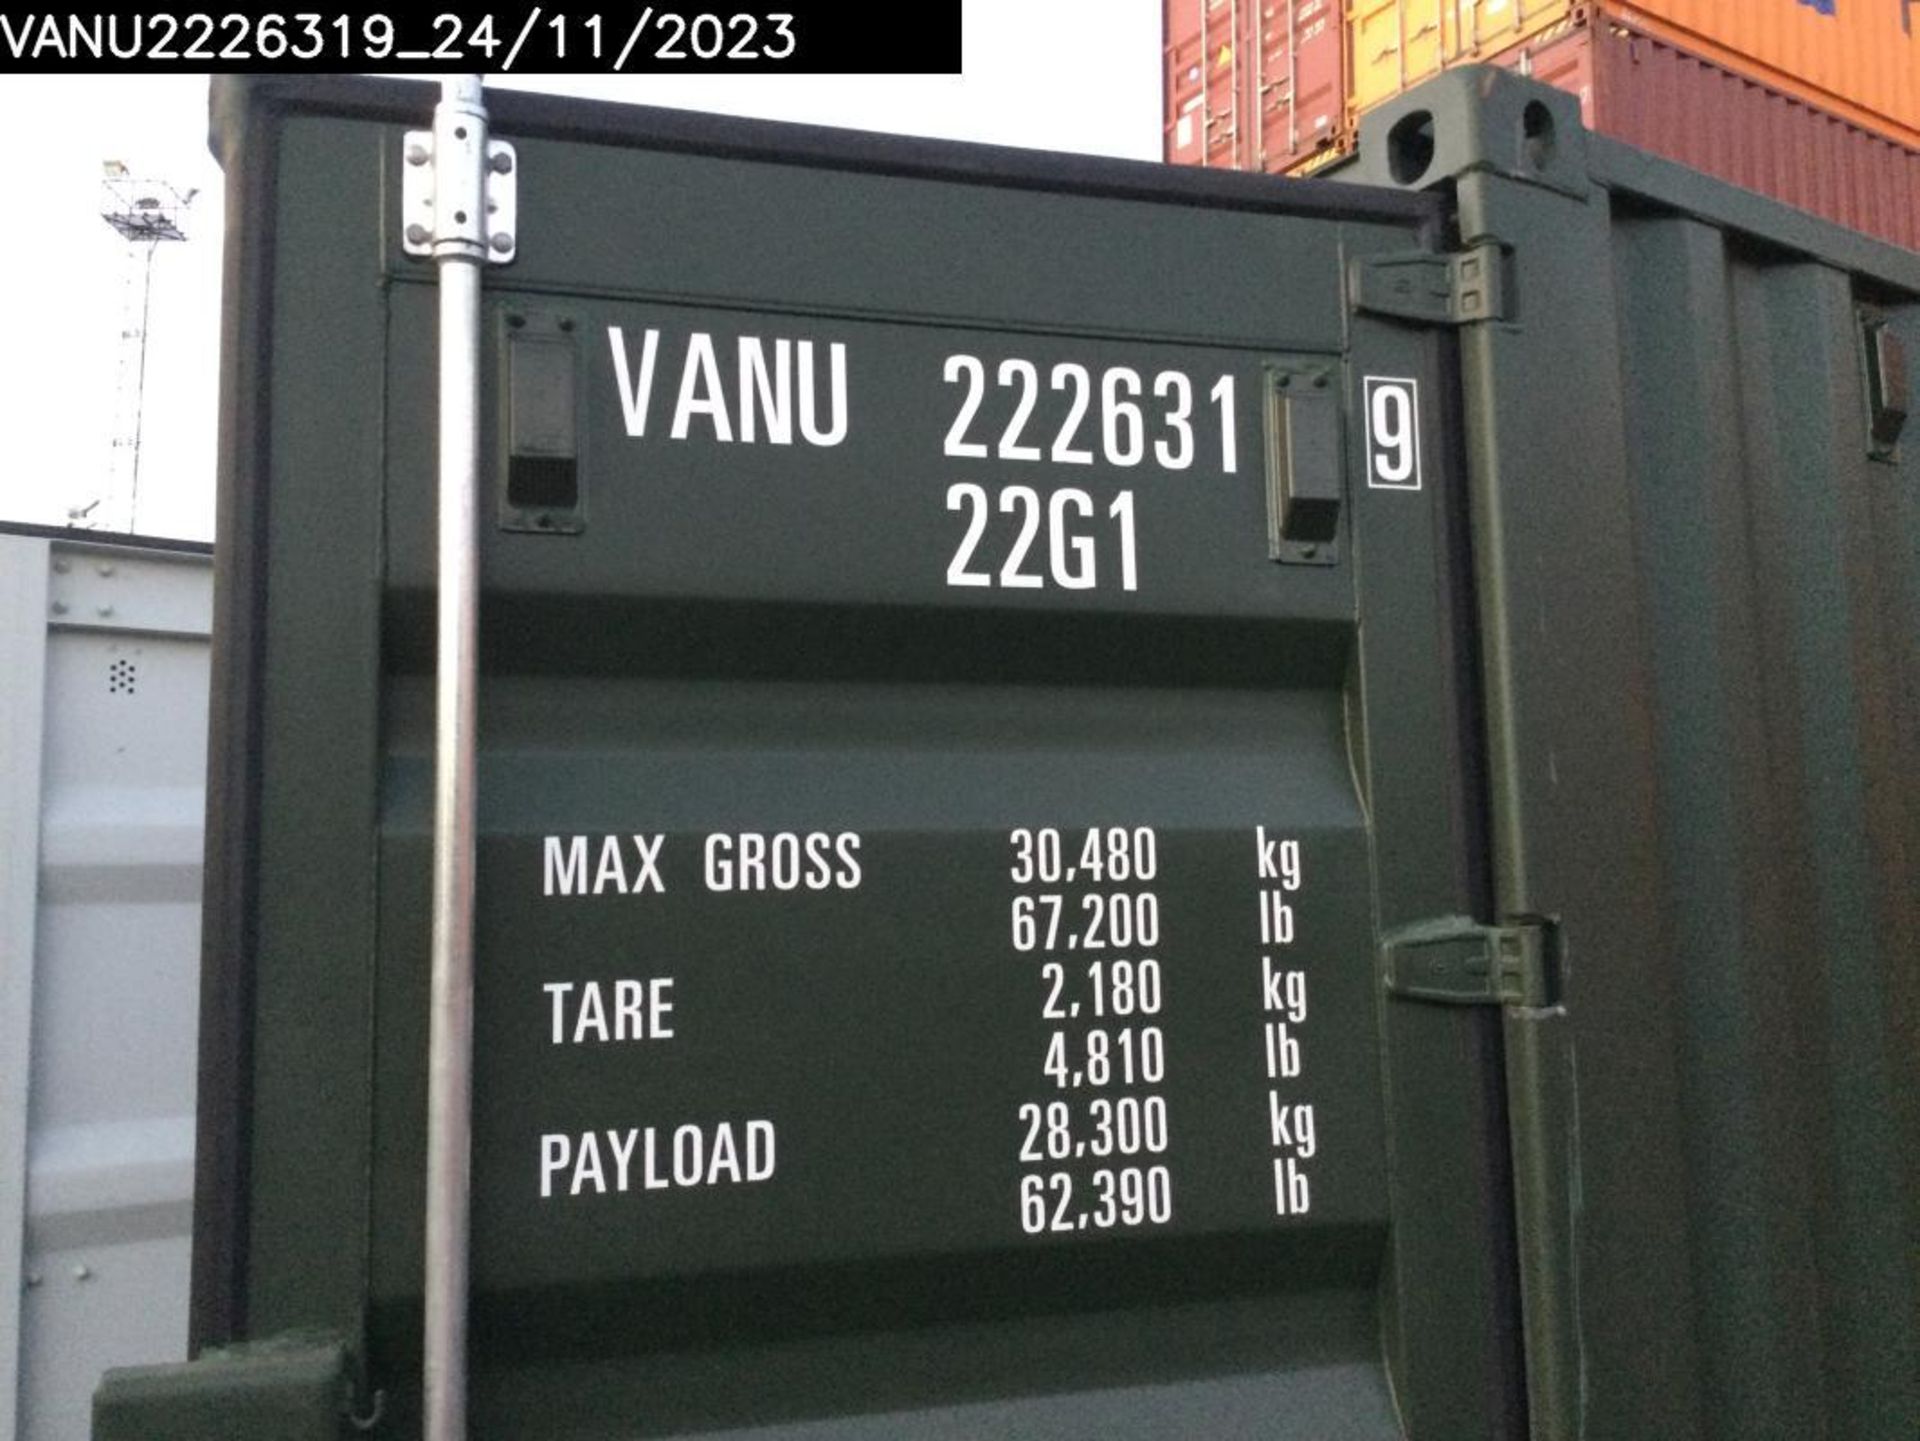 One Trip 20ft Shipping Container - Unit Number – VANU2226319 - Image 2 of 8